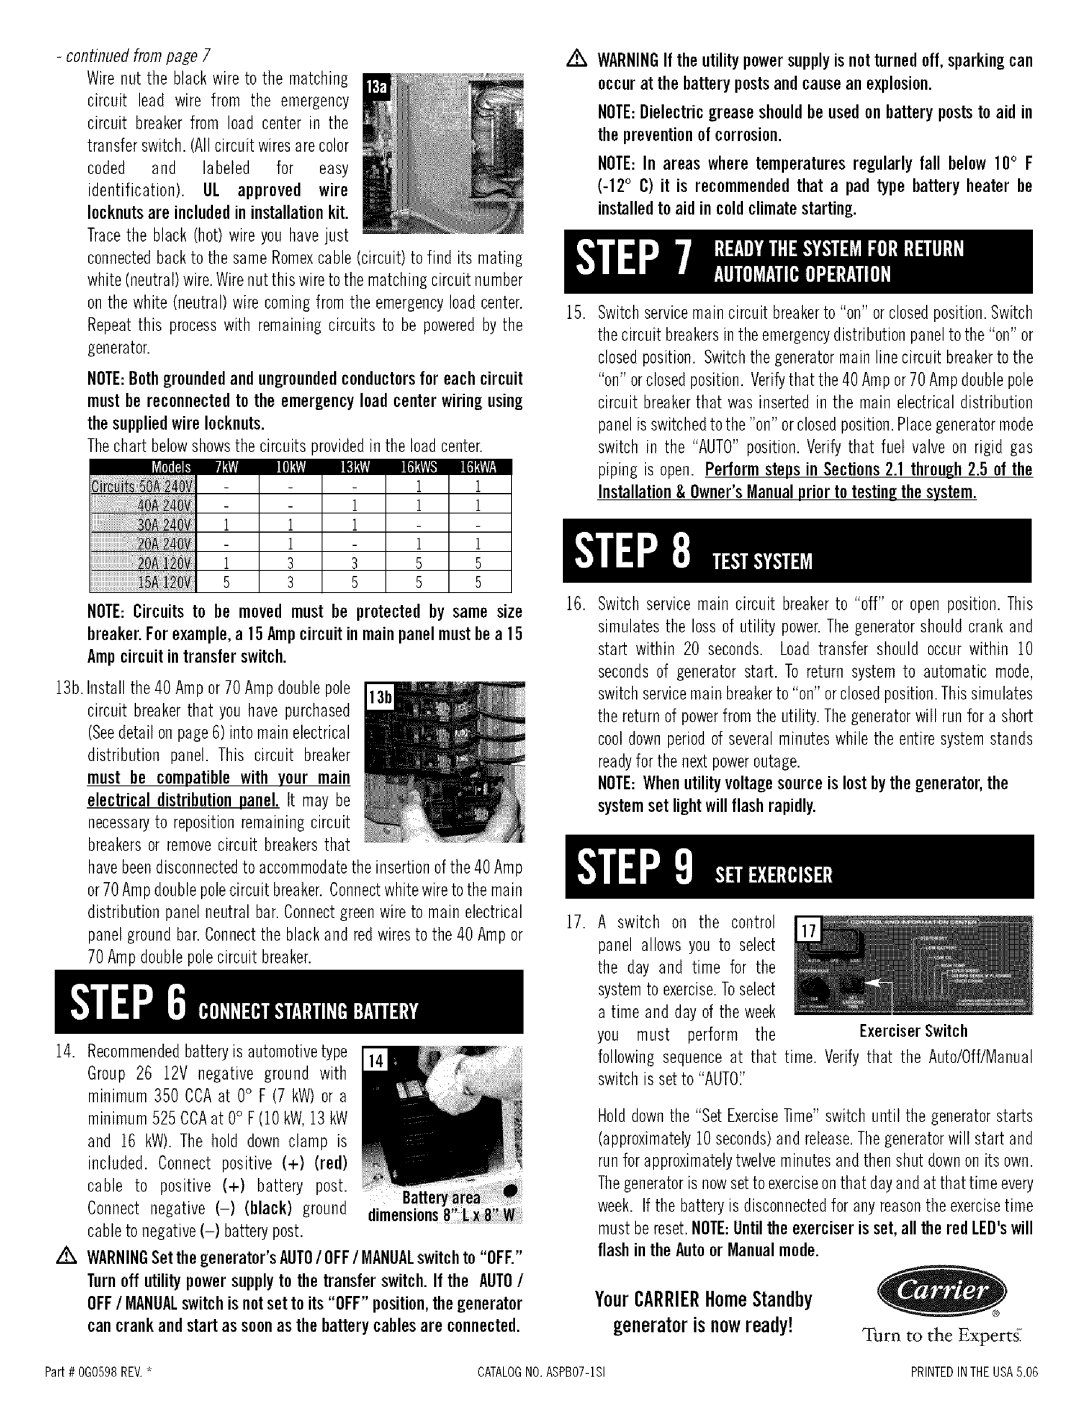 Carrier ASPB07-1SI owner manual YourCARRIERHomeStandby generatoris nowready, continuedfrompage7 